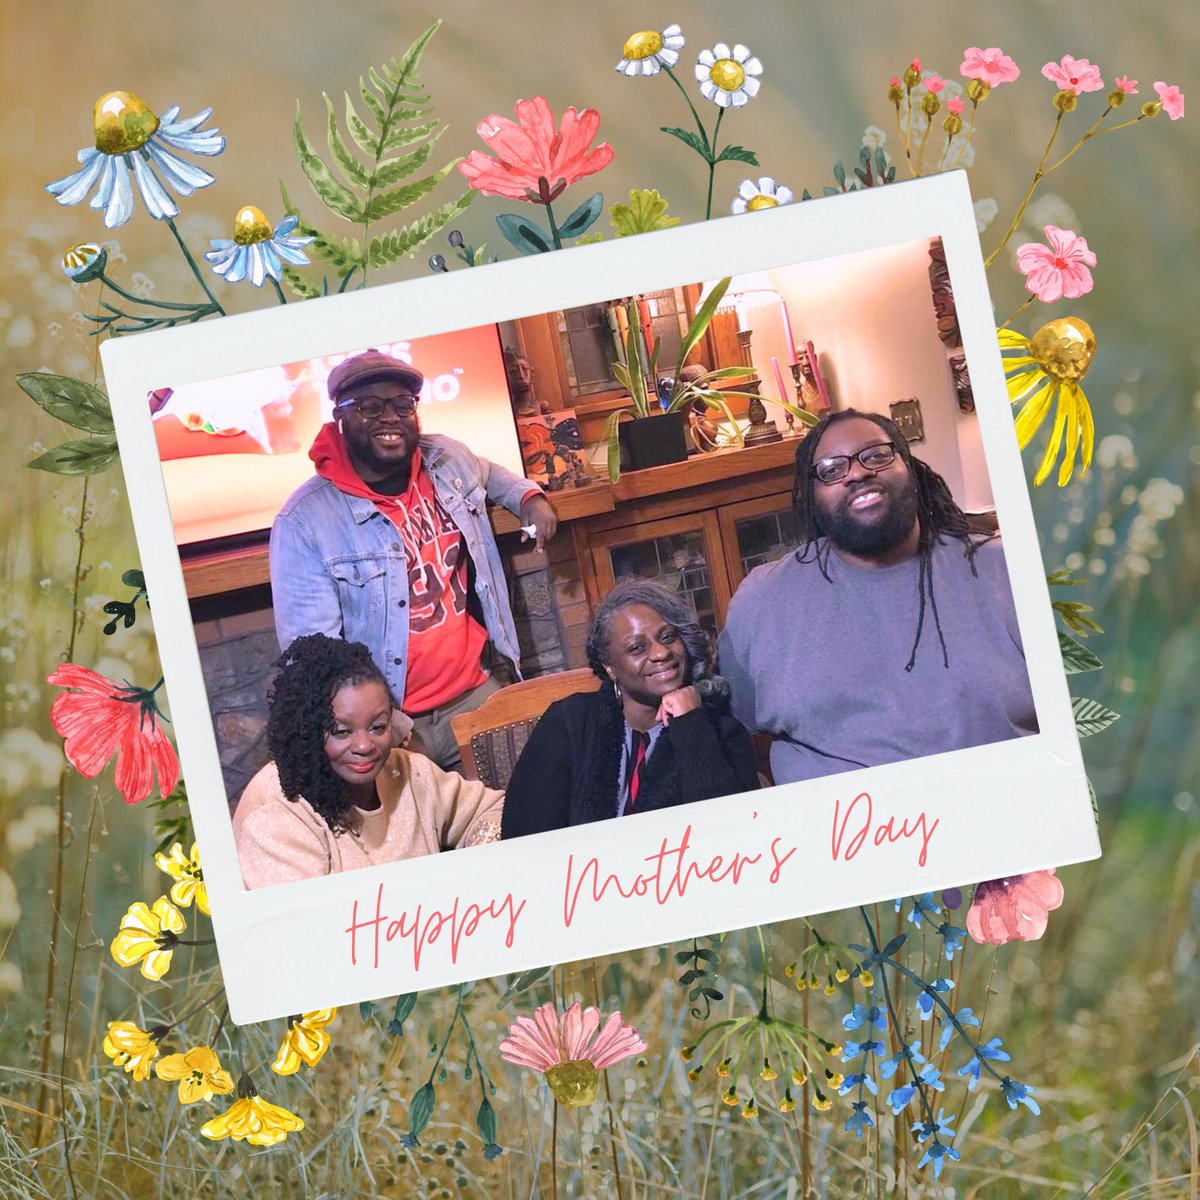 Happy Mother's Day to all the incredible moms out there! Whether you're a mom, grandma, aunt, or mentor, your love and guidance shape the world in countless ways. I’m forever grateful to these three who blessed me with the title of mom.